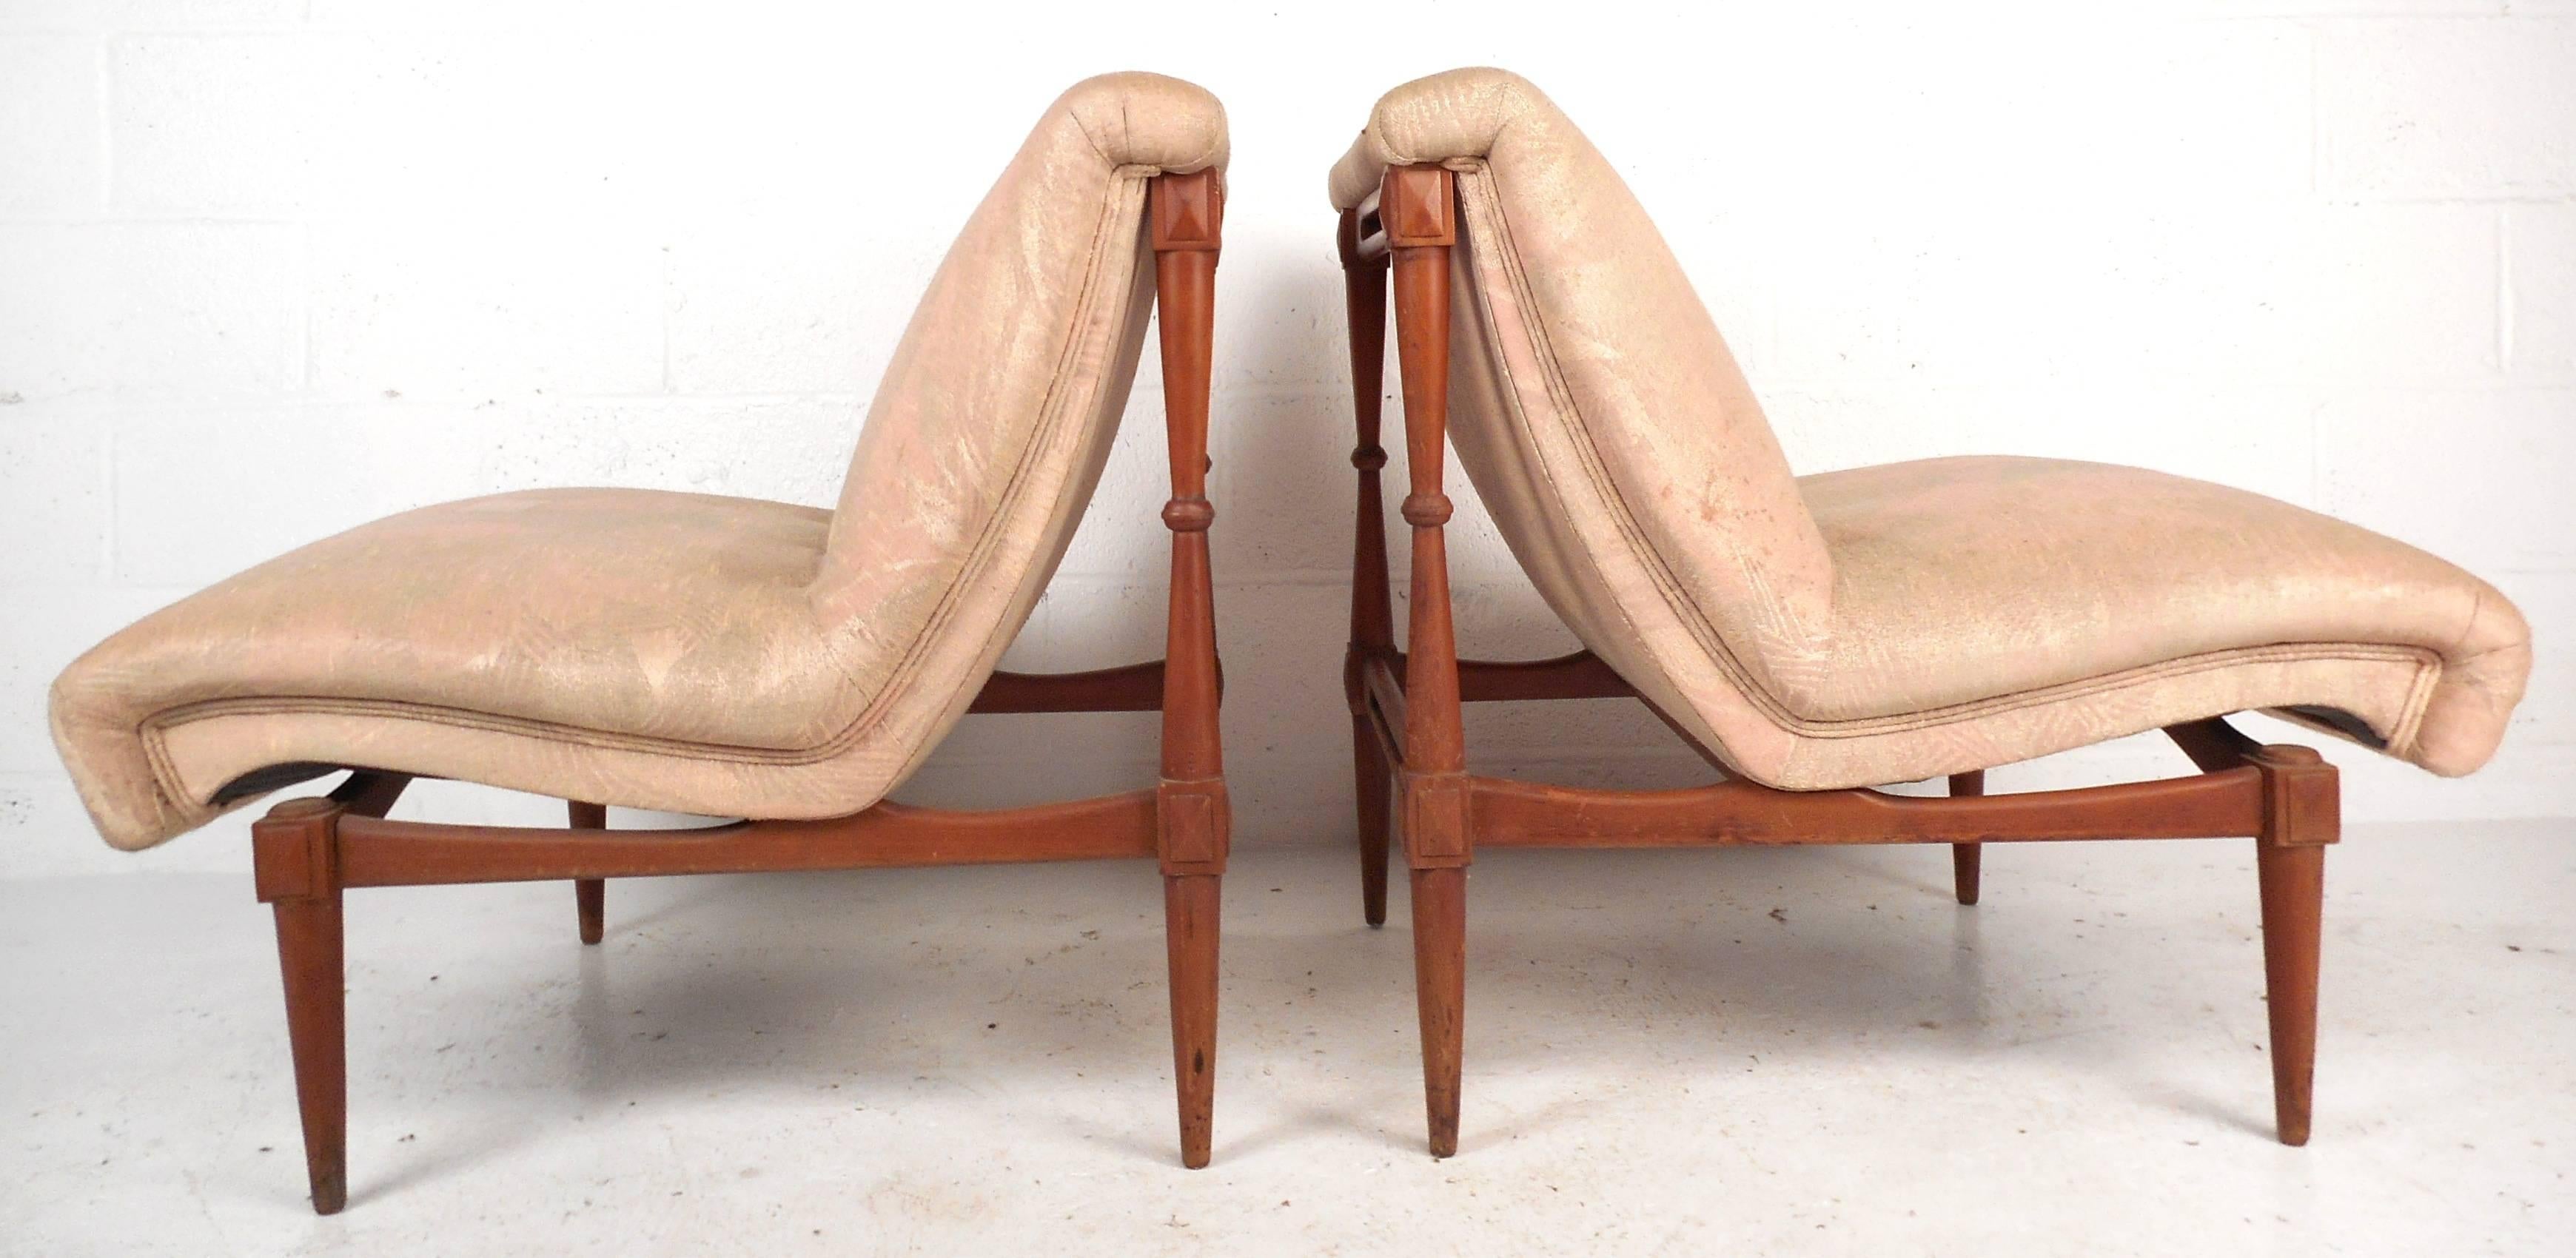 American Pair of Mid-Century Modern Sculpted Walnut Slipper Chairs